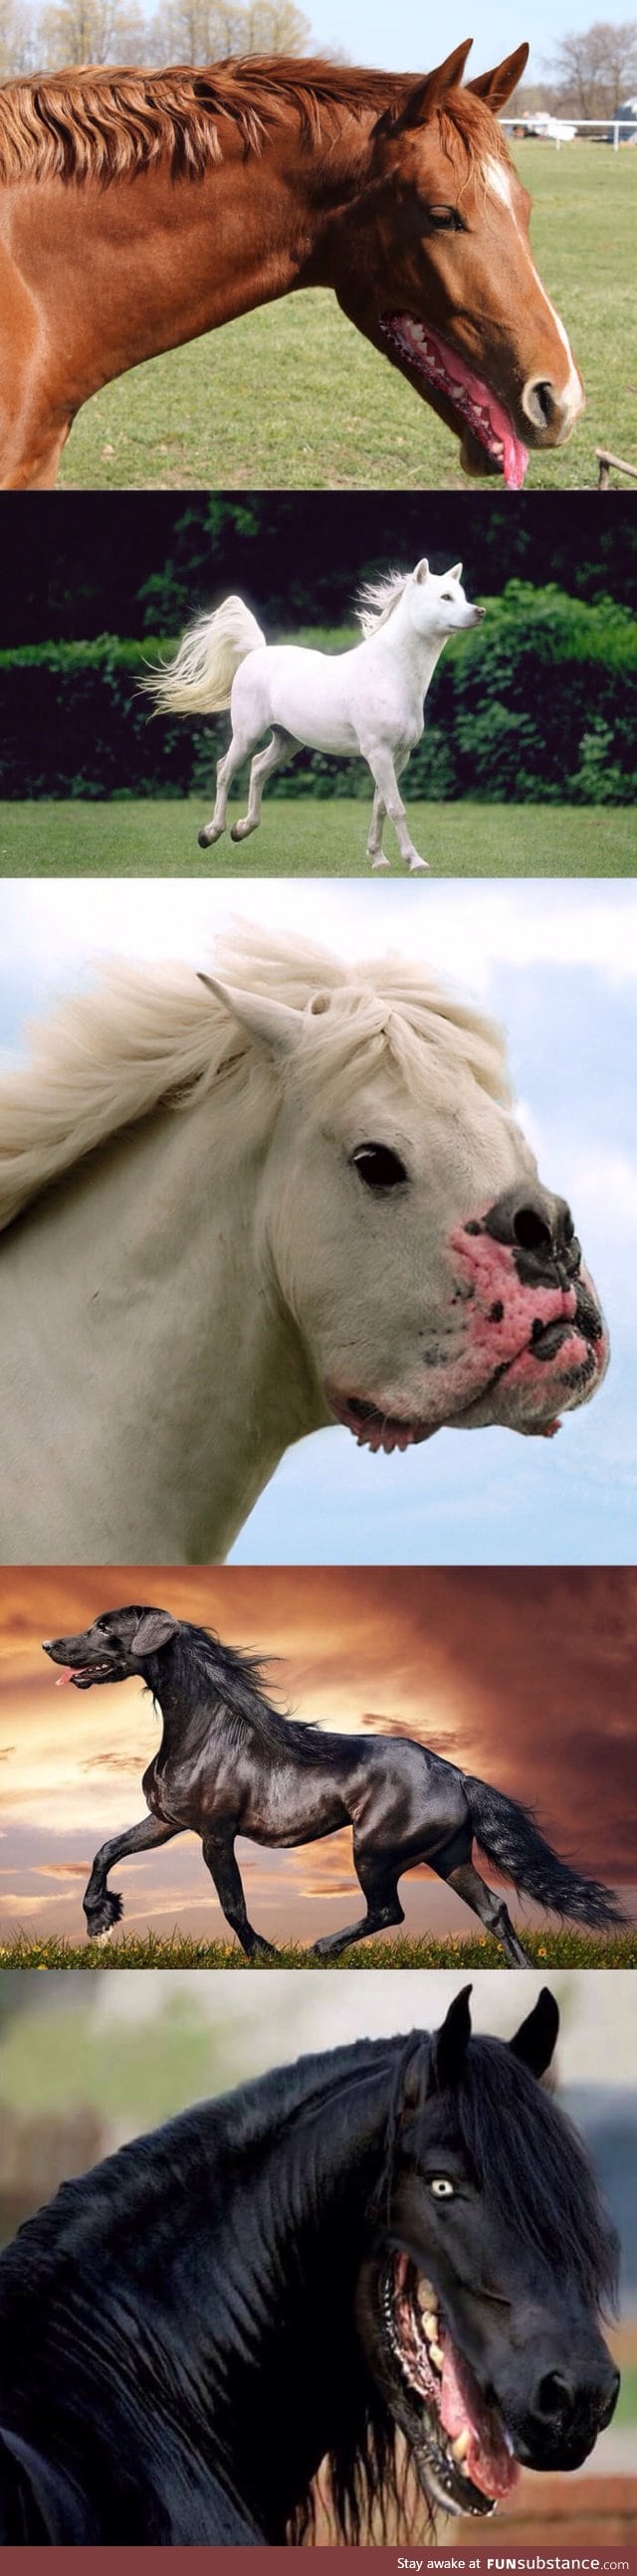 If a horses mouth was like a dogs